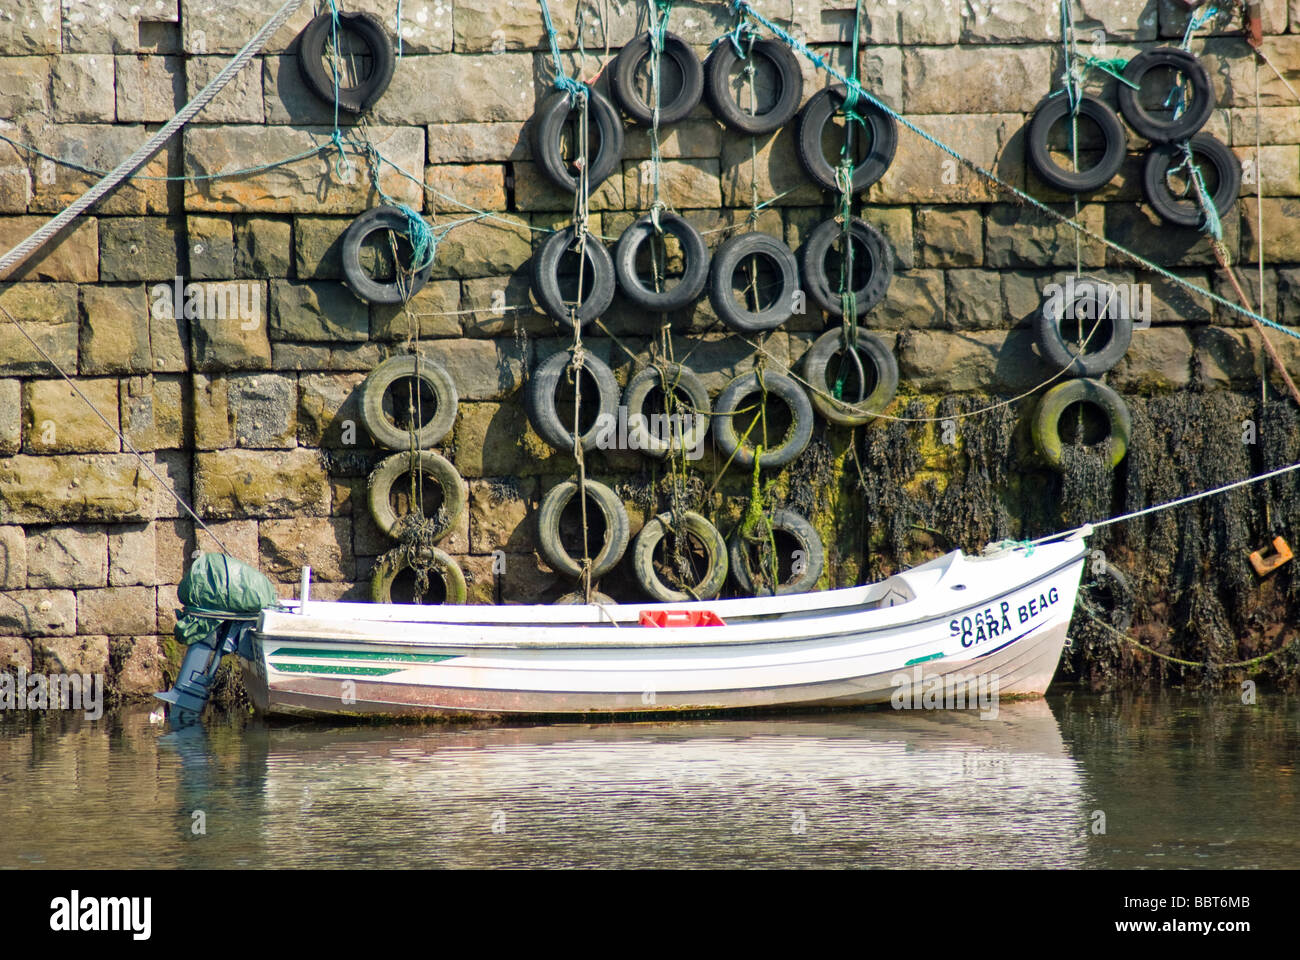 A small boat moored in Mullaghmore harbour, County Sligo, Ireland Stock Photo